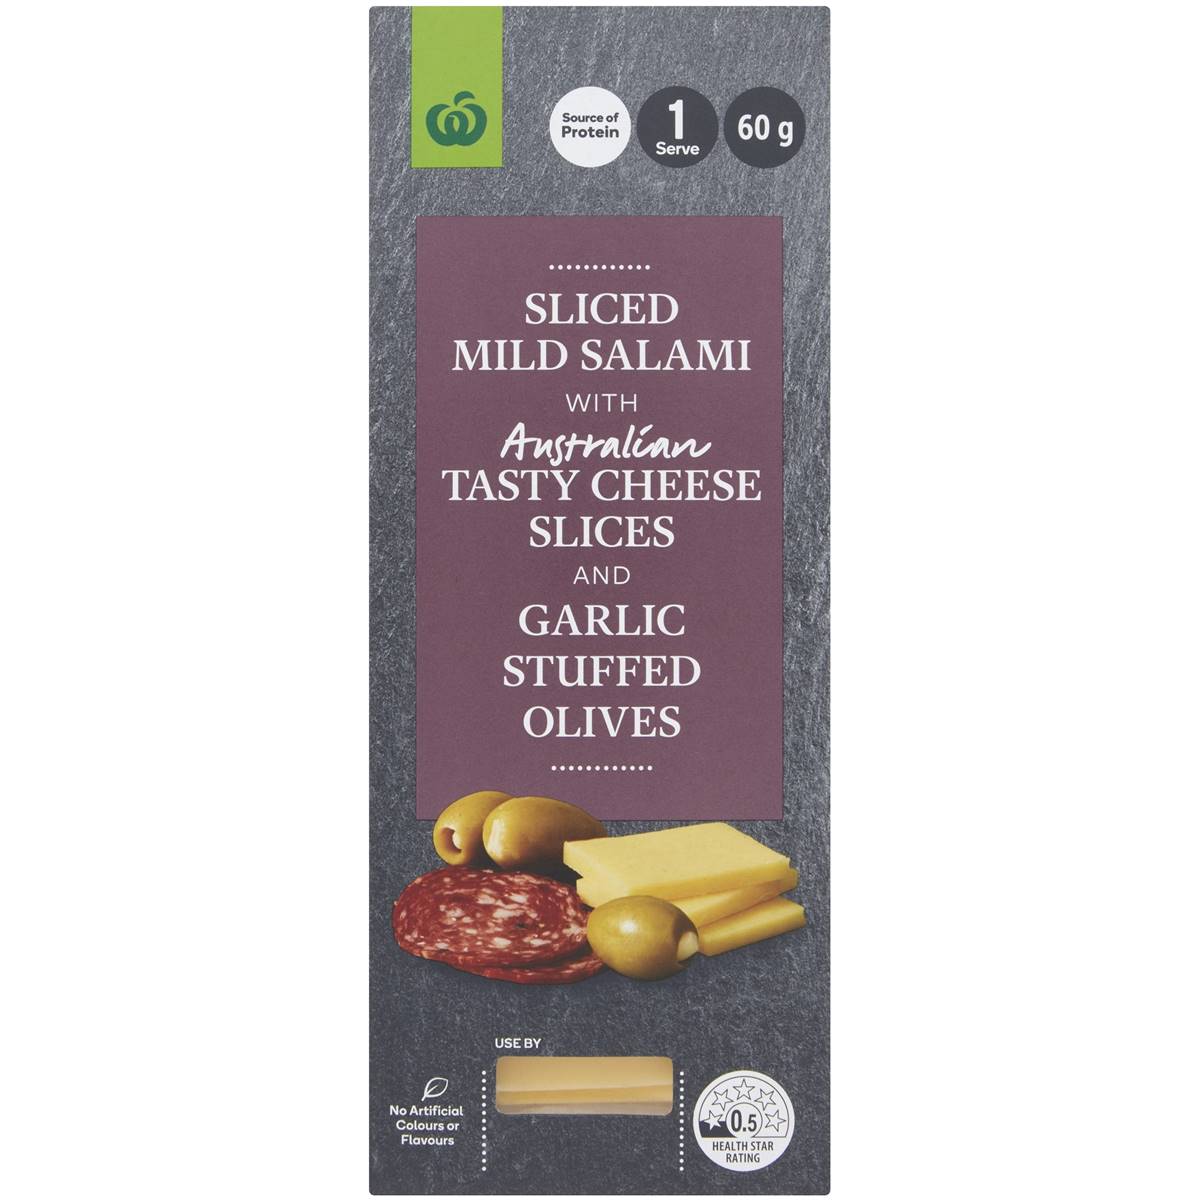 Calories in Woolworths Sliced Mild Salami With Tasty Cheese, Garlic Stuffed Olives